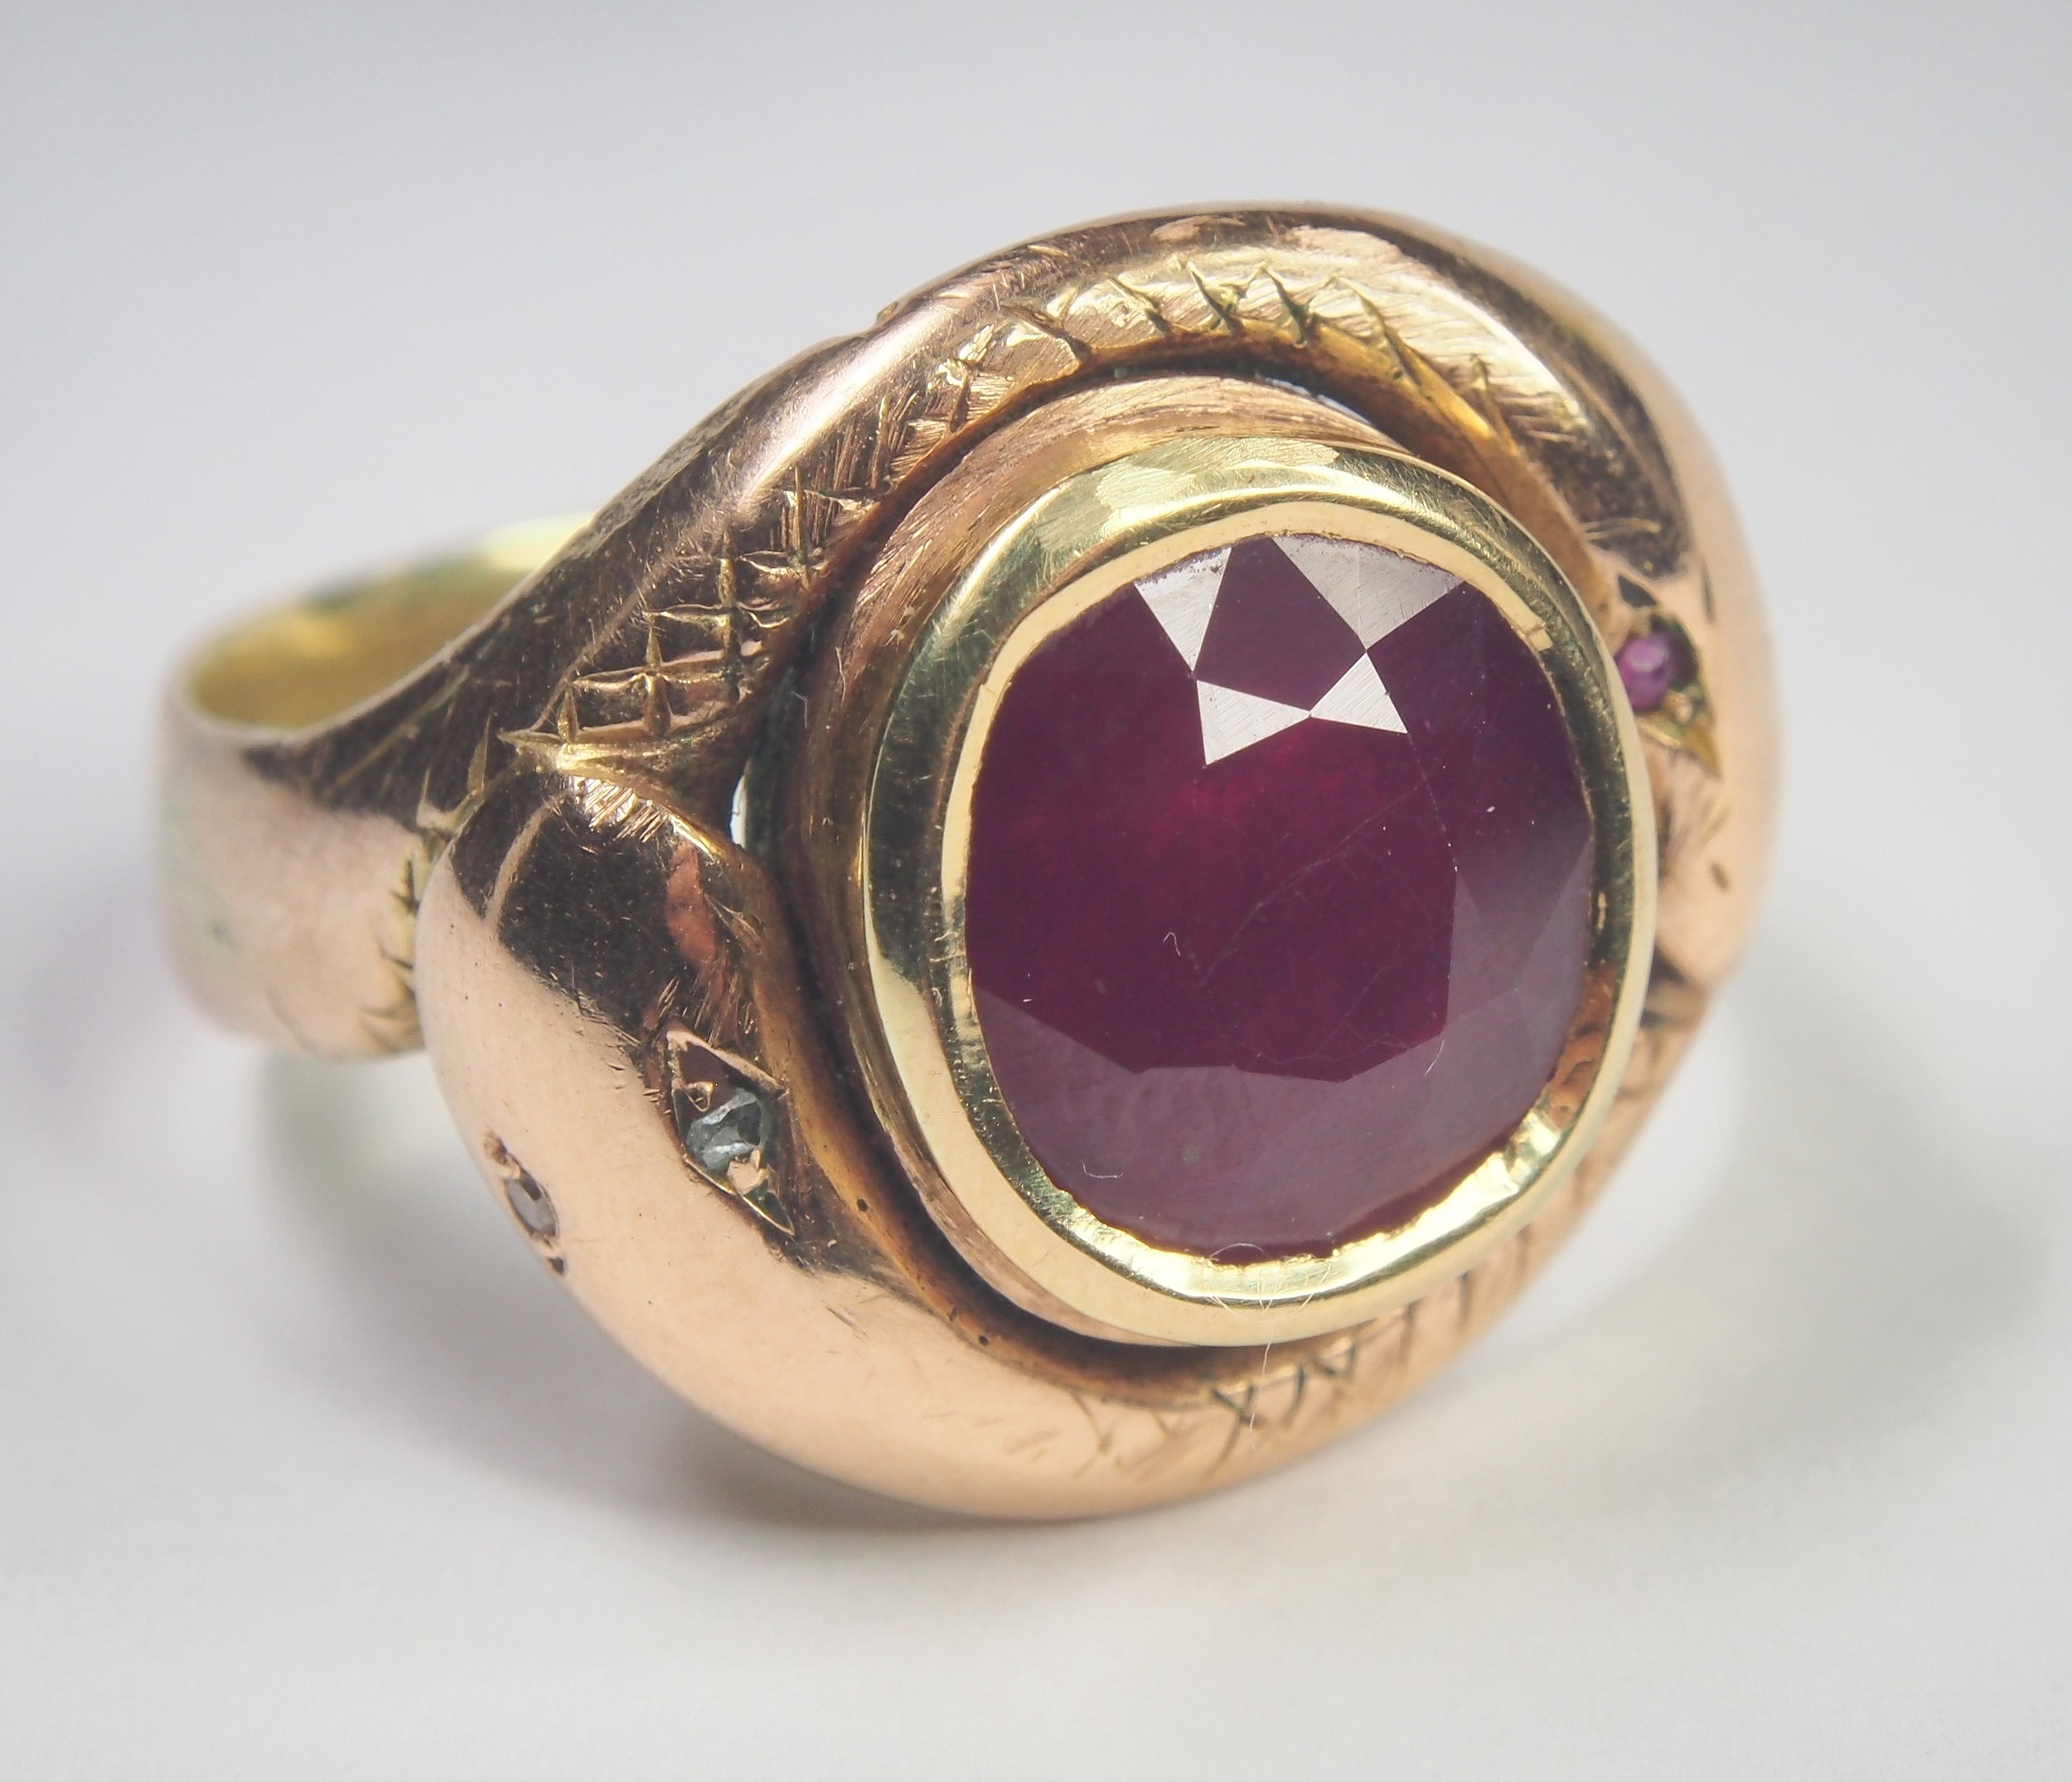 Antique serpent ring containing a modern glass filled ruby